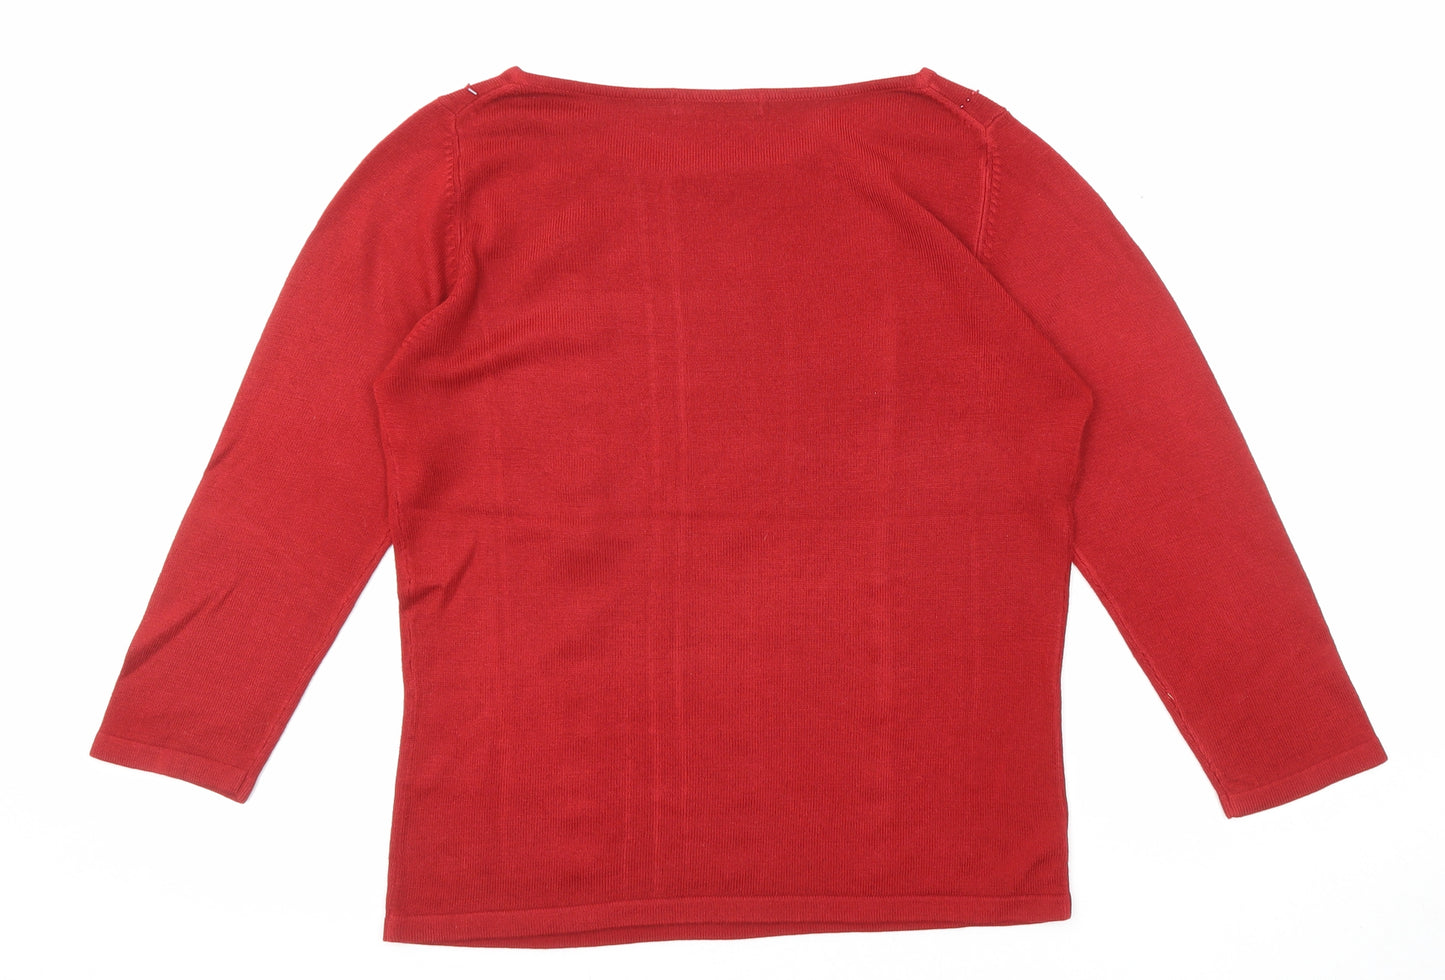 Marks and Spencer Womens Red Boat Neck Acrylic Pullover Jumper Size 8 - Beaded